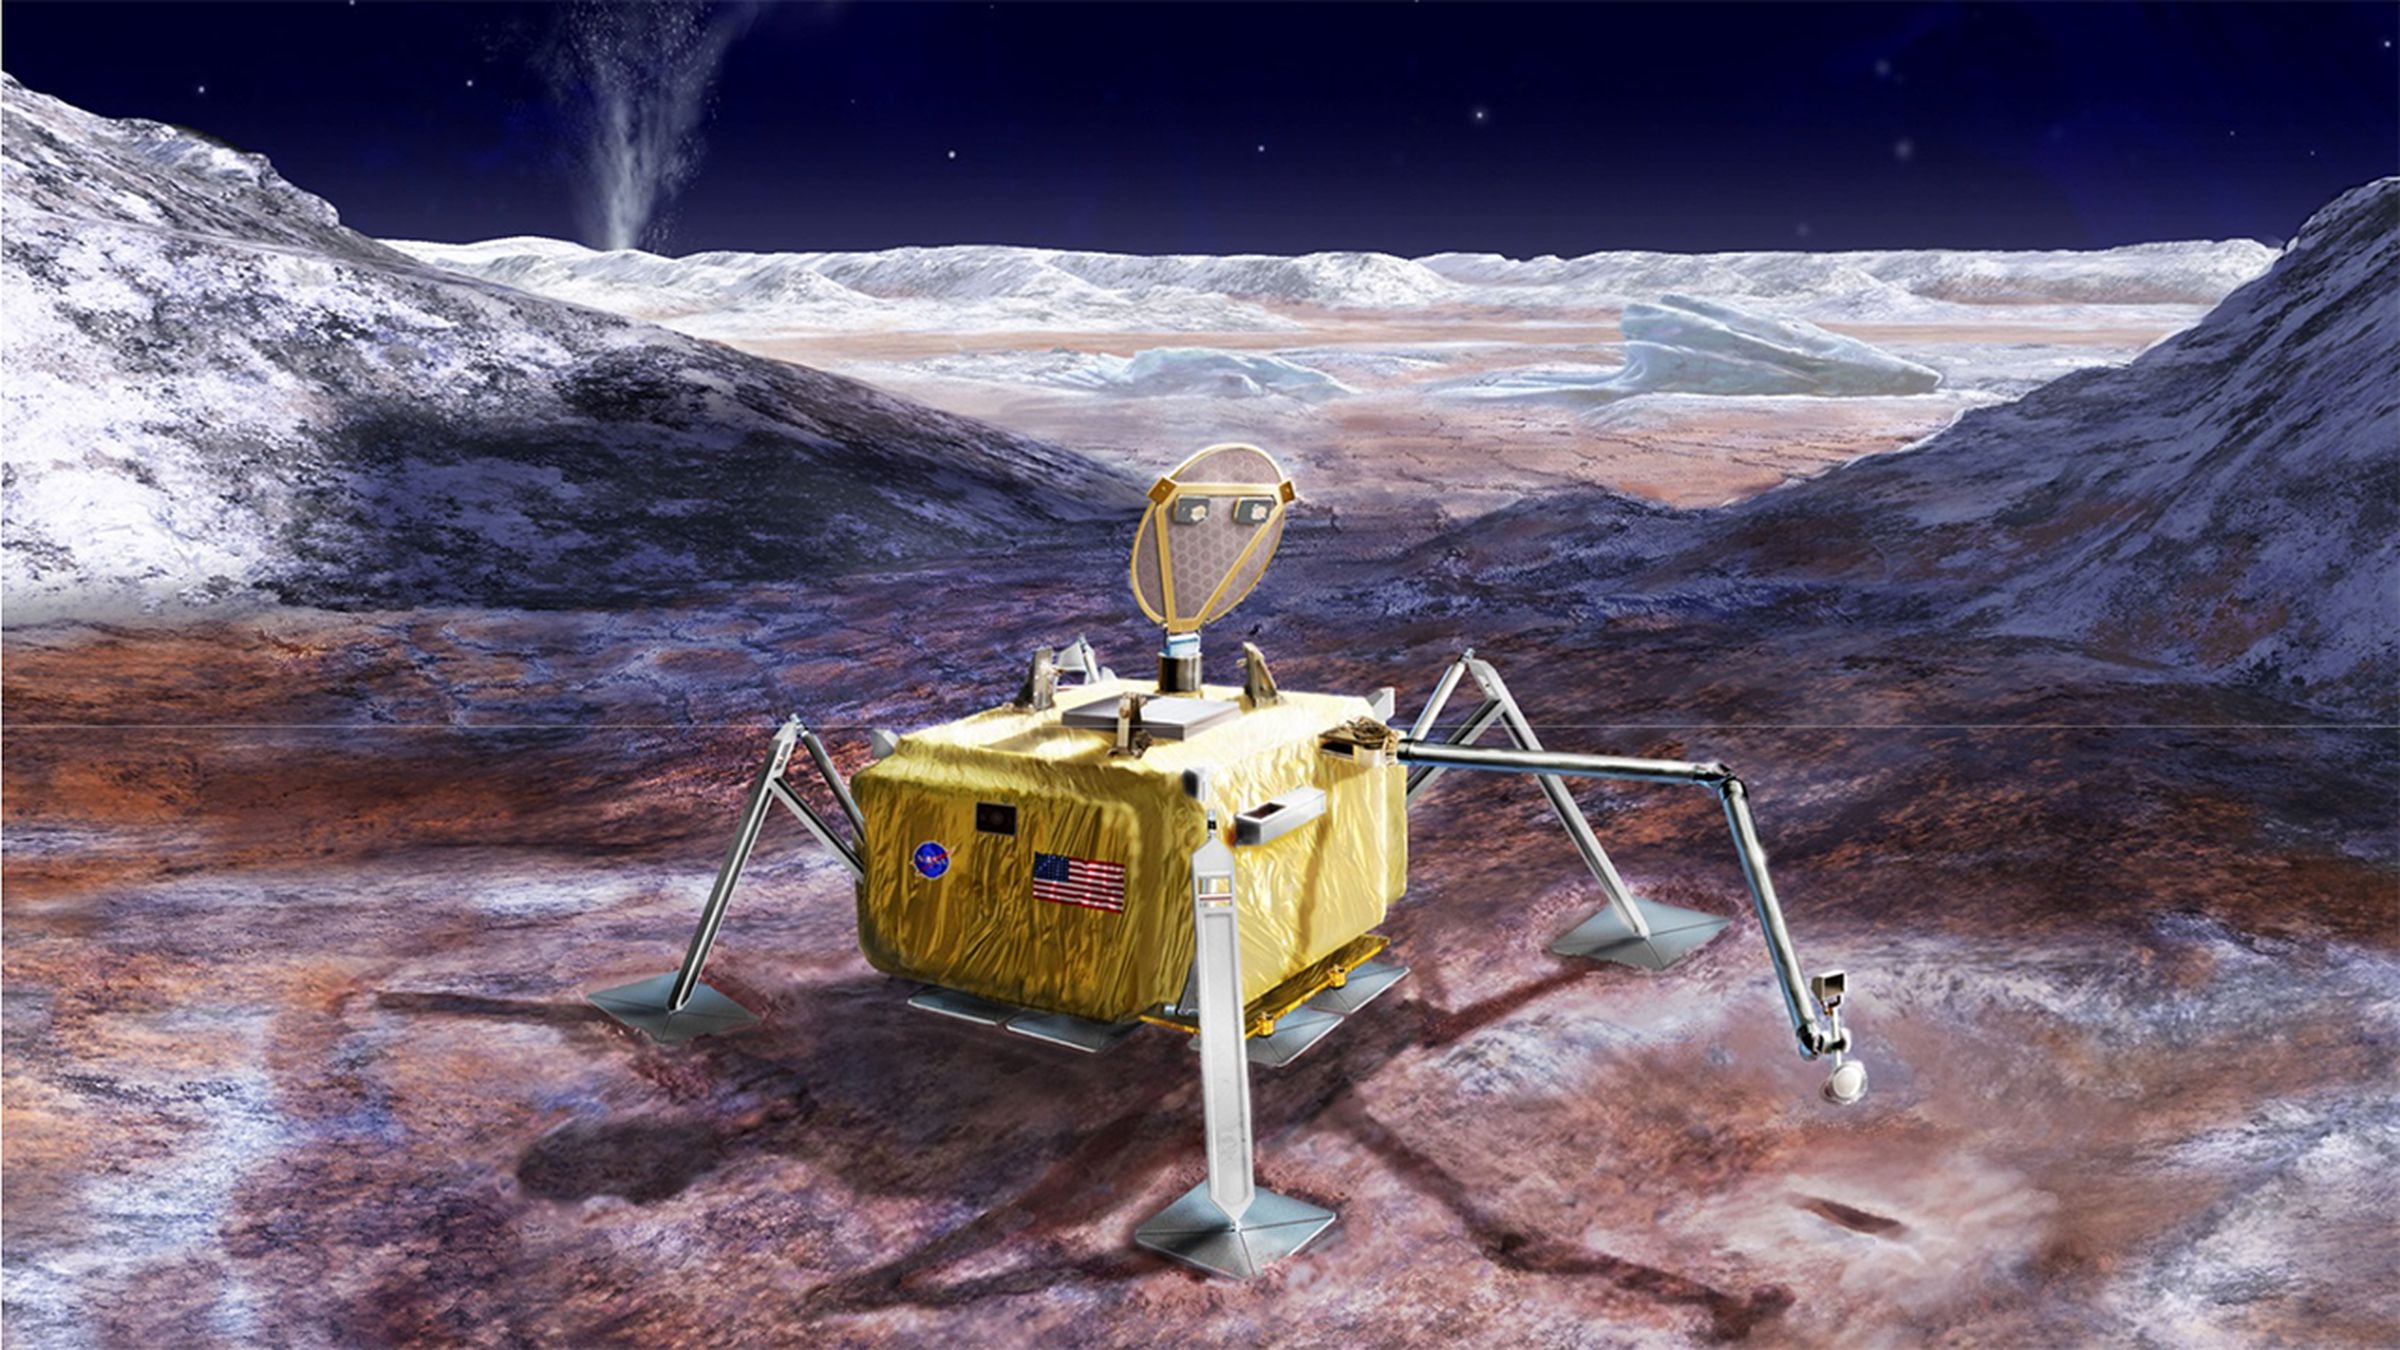 An artistic illustration of what a Europa lander could look like